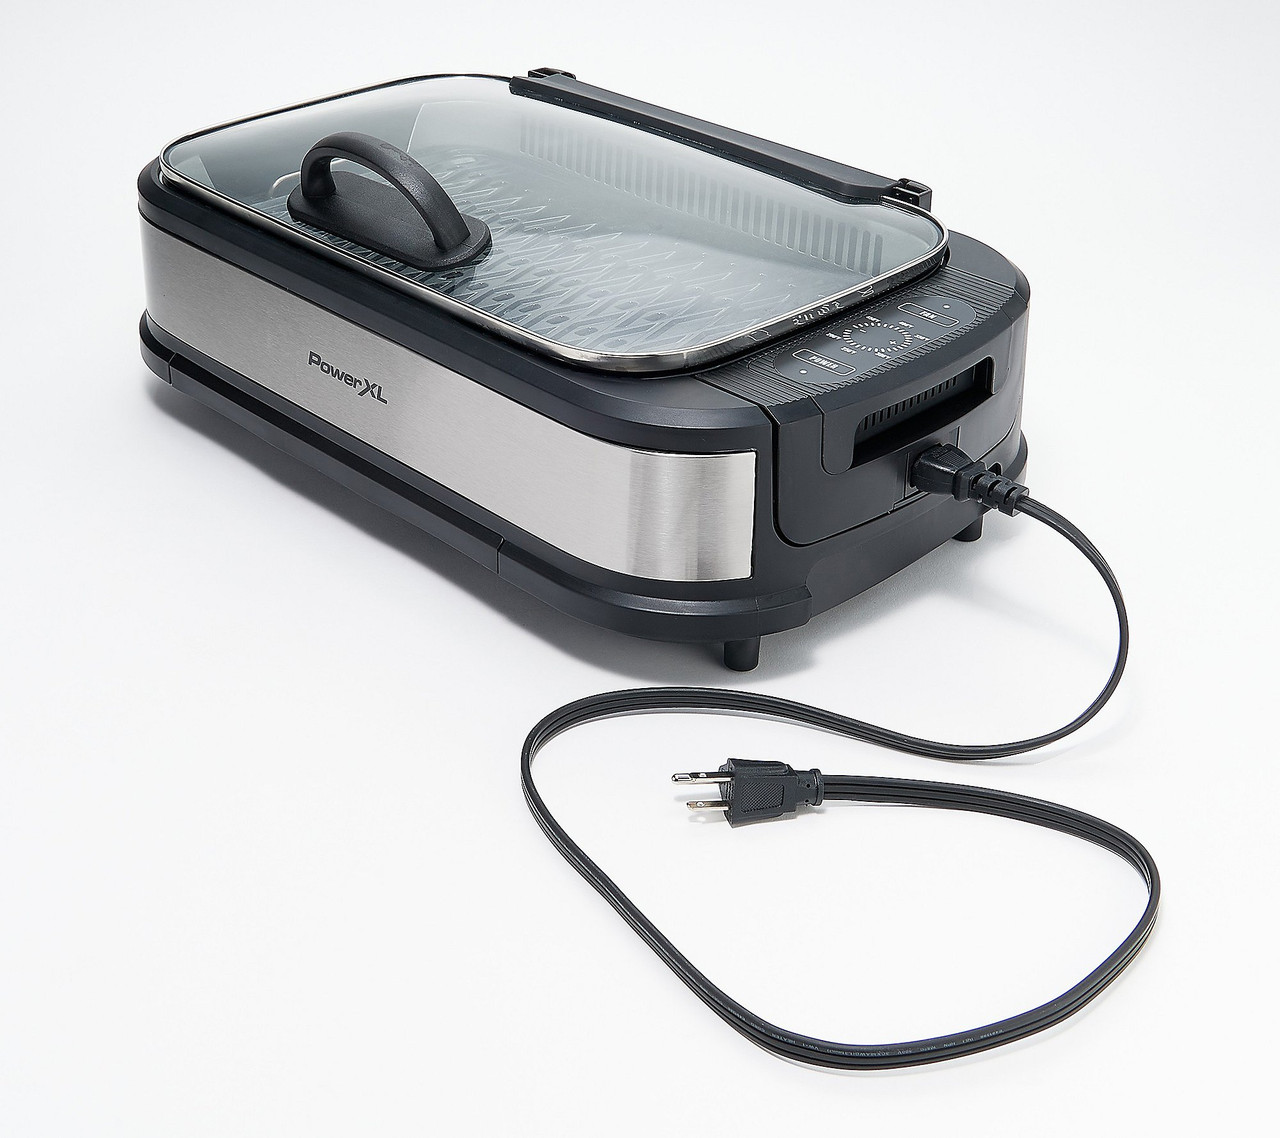 PowerXL 1500W Smokeless Grill Pro with Griddle Plate Refurbished